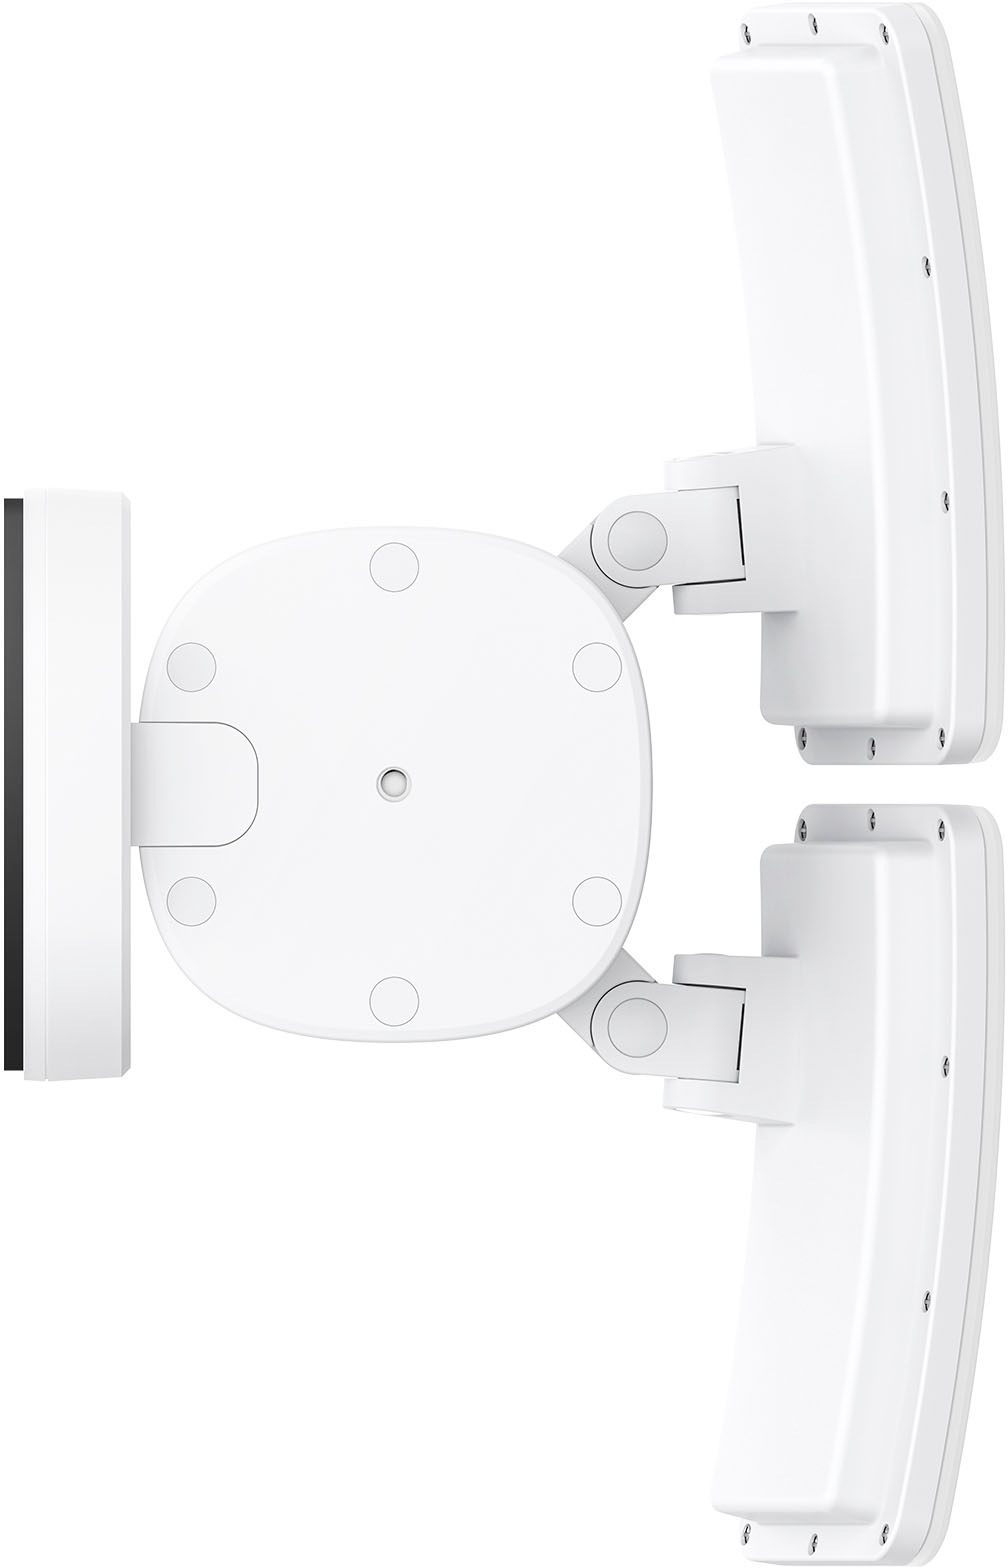 Eufy's new Floodlight Cam E340 is the hardest working security camera I've  tested